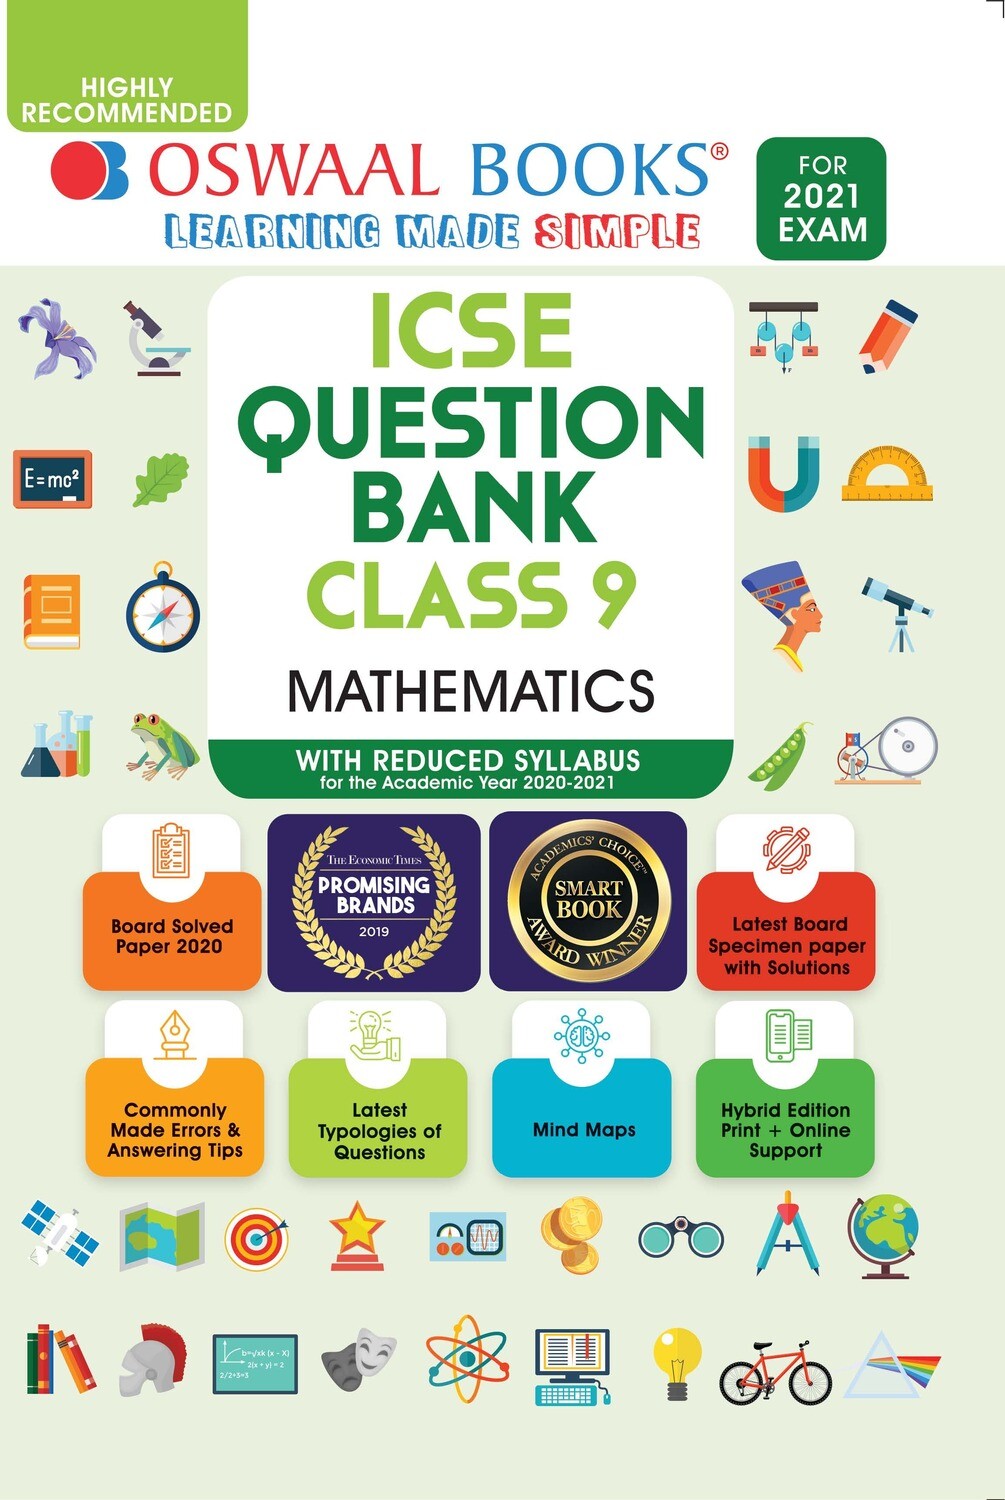 Buy e-book: Oswaal ICSE Question Banks Class 9 Mathematics (Reduced Syllabus) (For 2021 Exam)